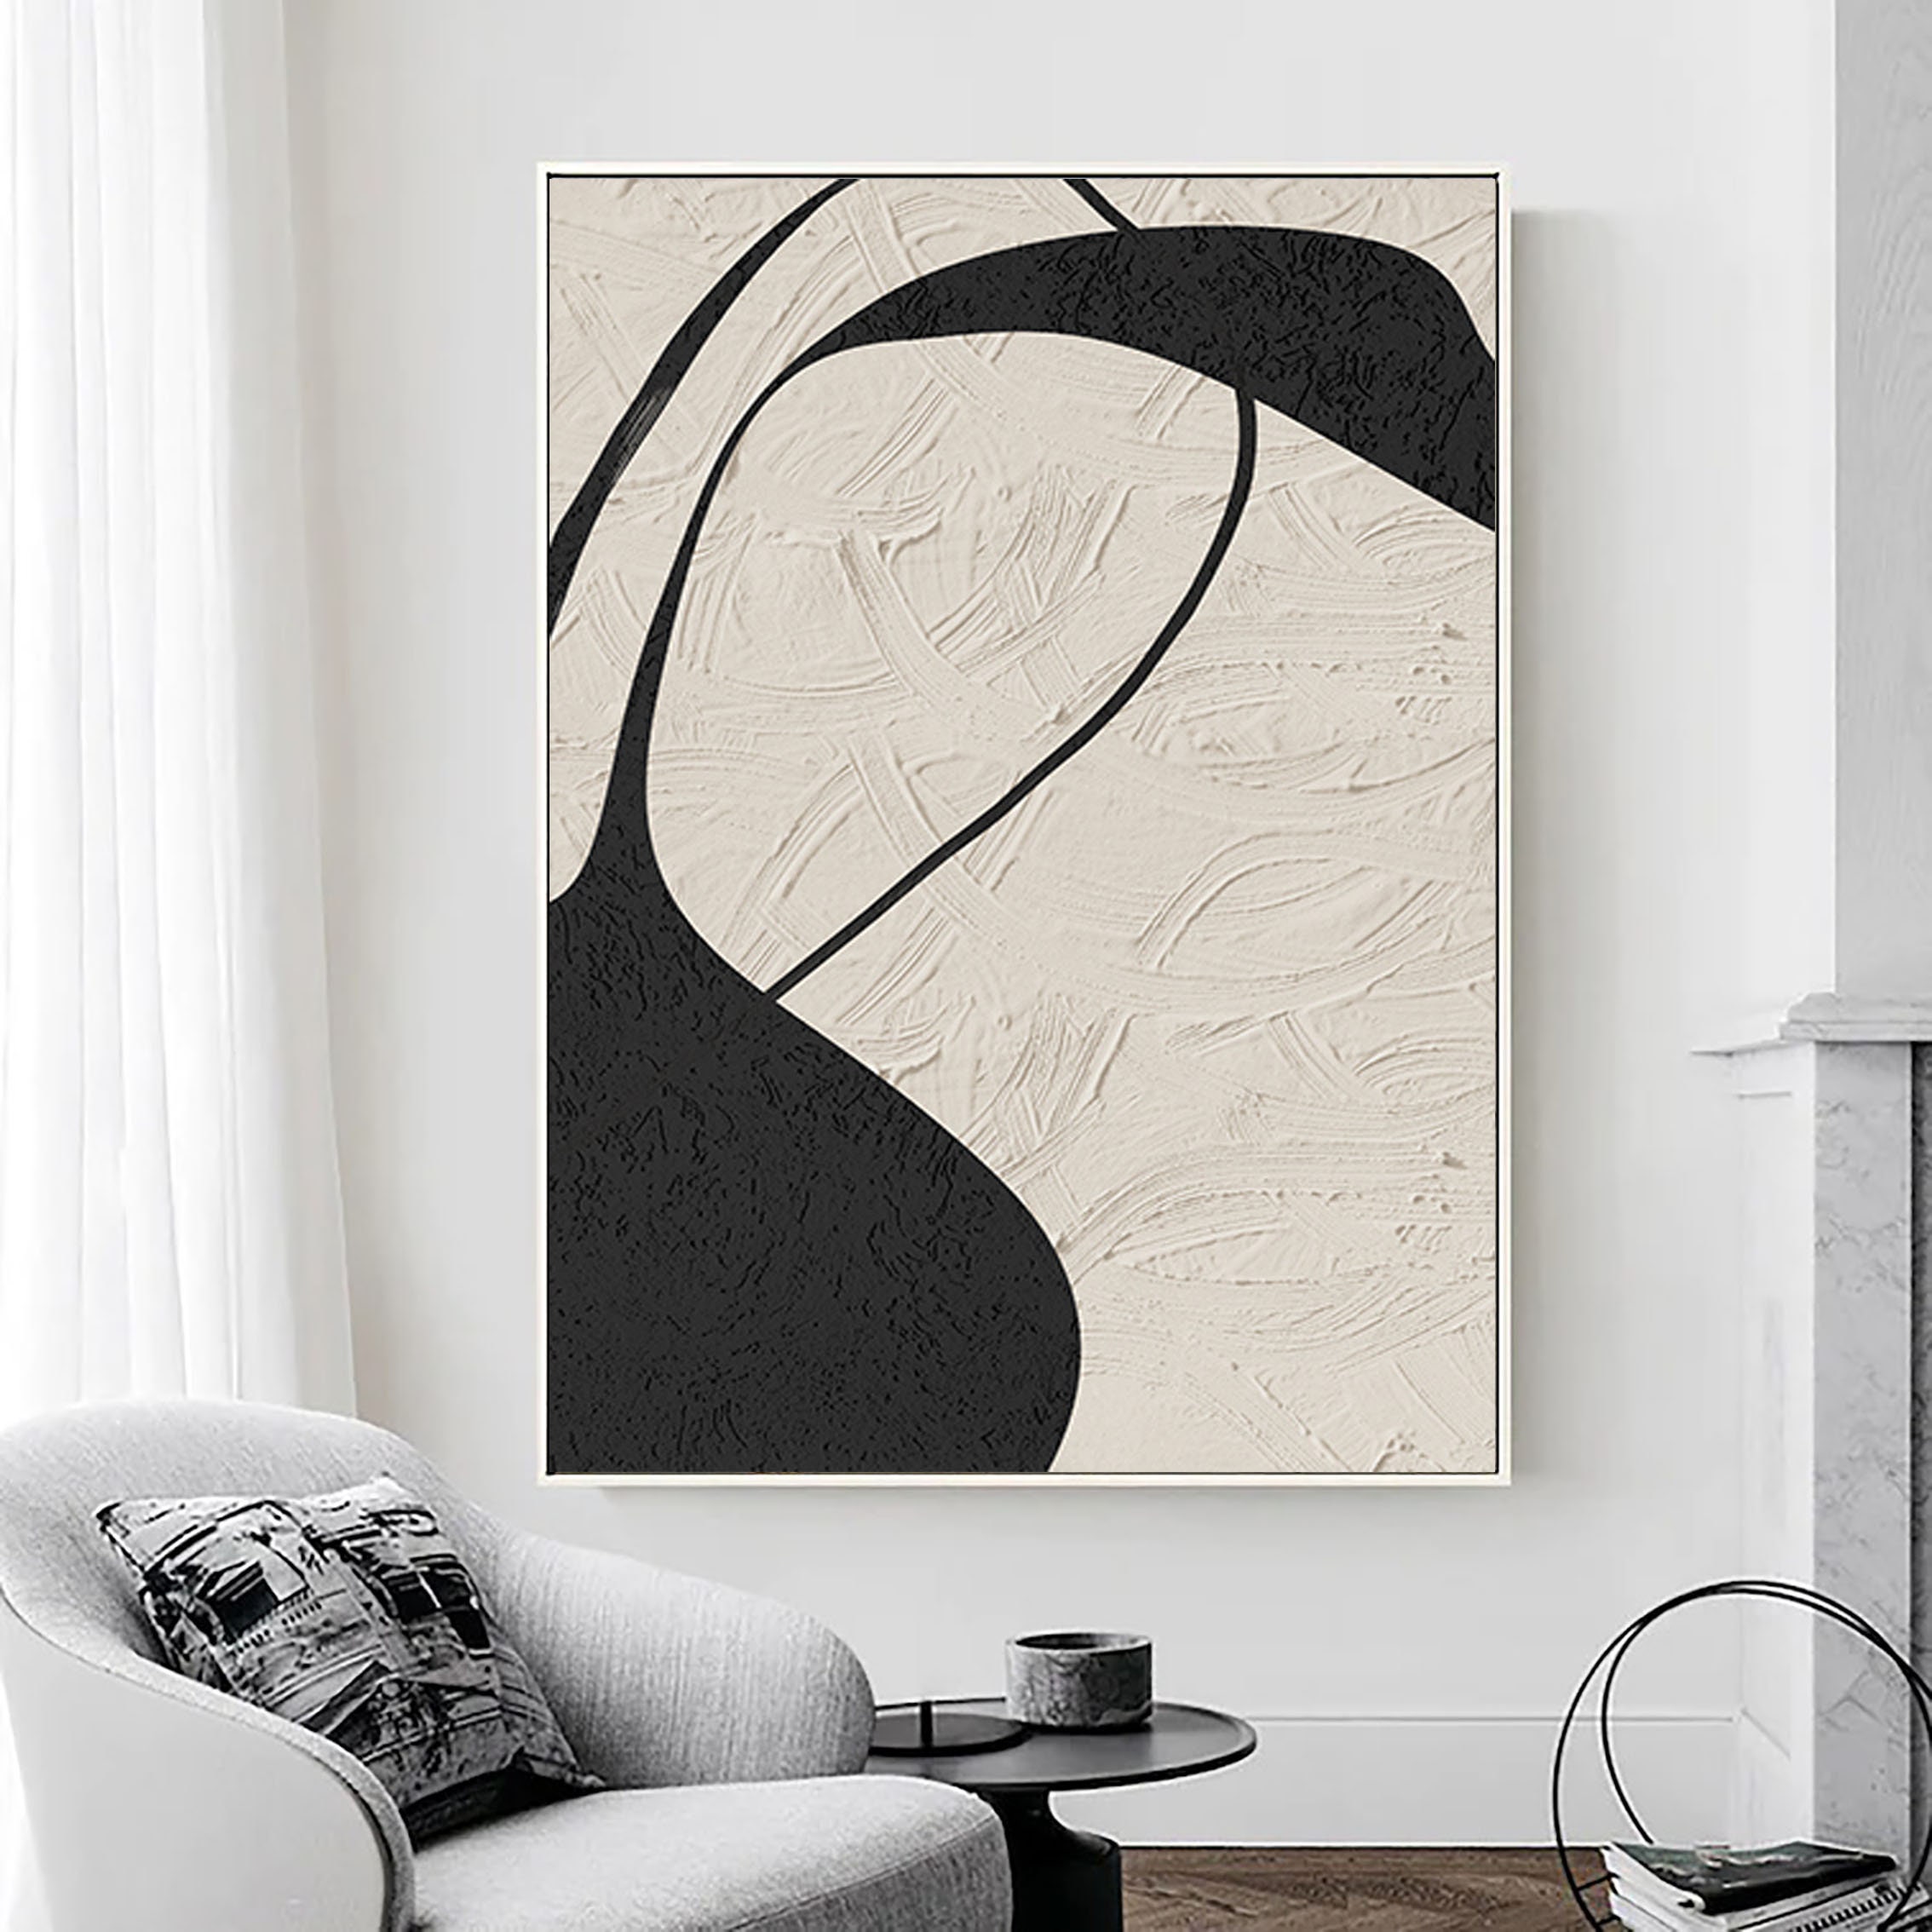 Extra Large White & Black Canvas Art, Minimalist Beige and Brown Abstract  Painting, Handmade Oil on Canvas, Nordic Style Wall Art Decor 